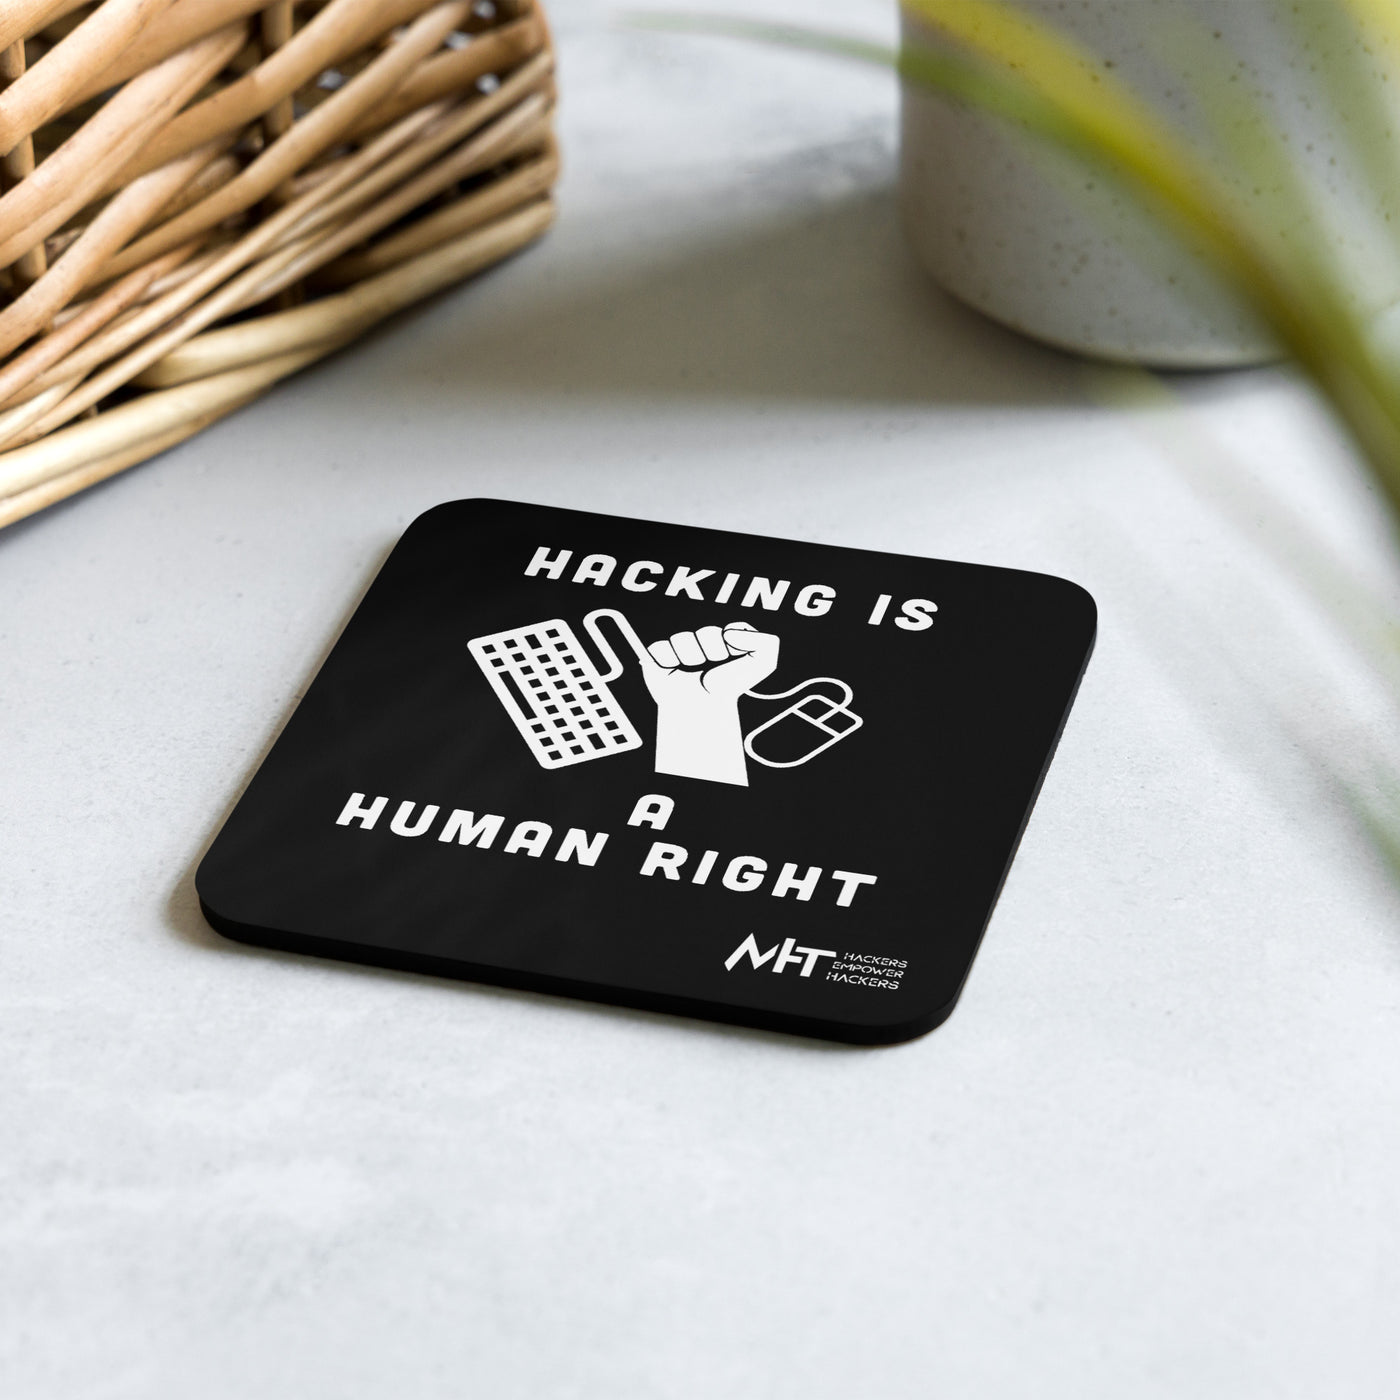 Hacking is a human right - Cork-back coaster